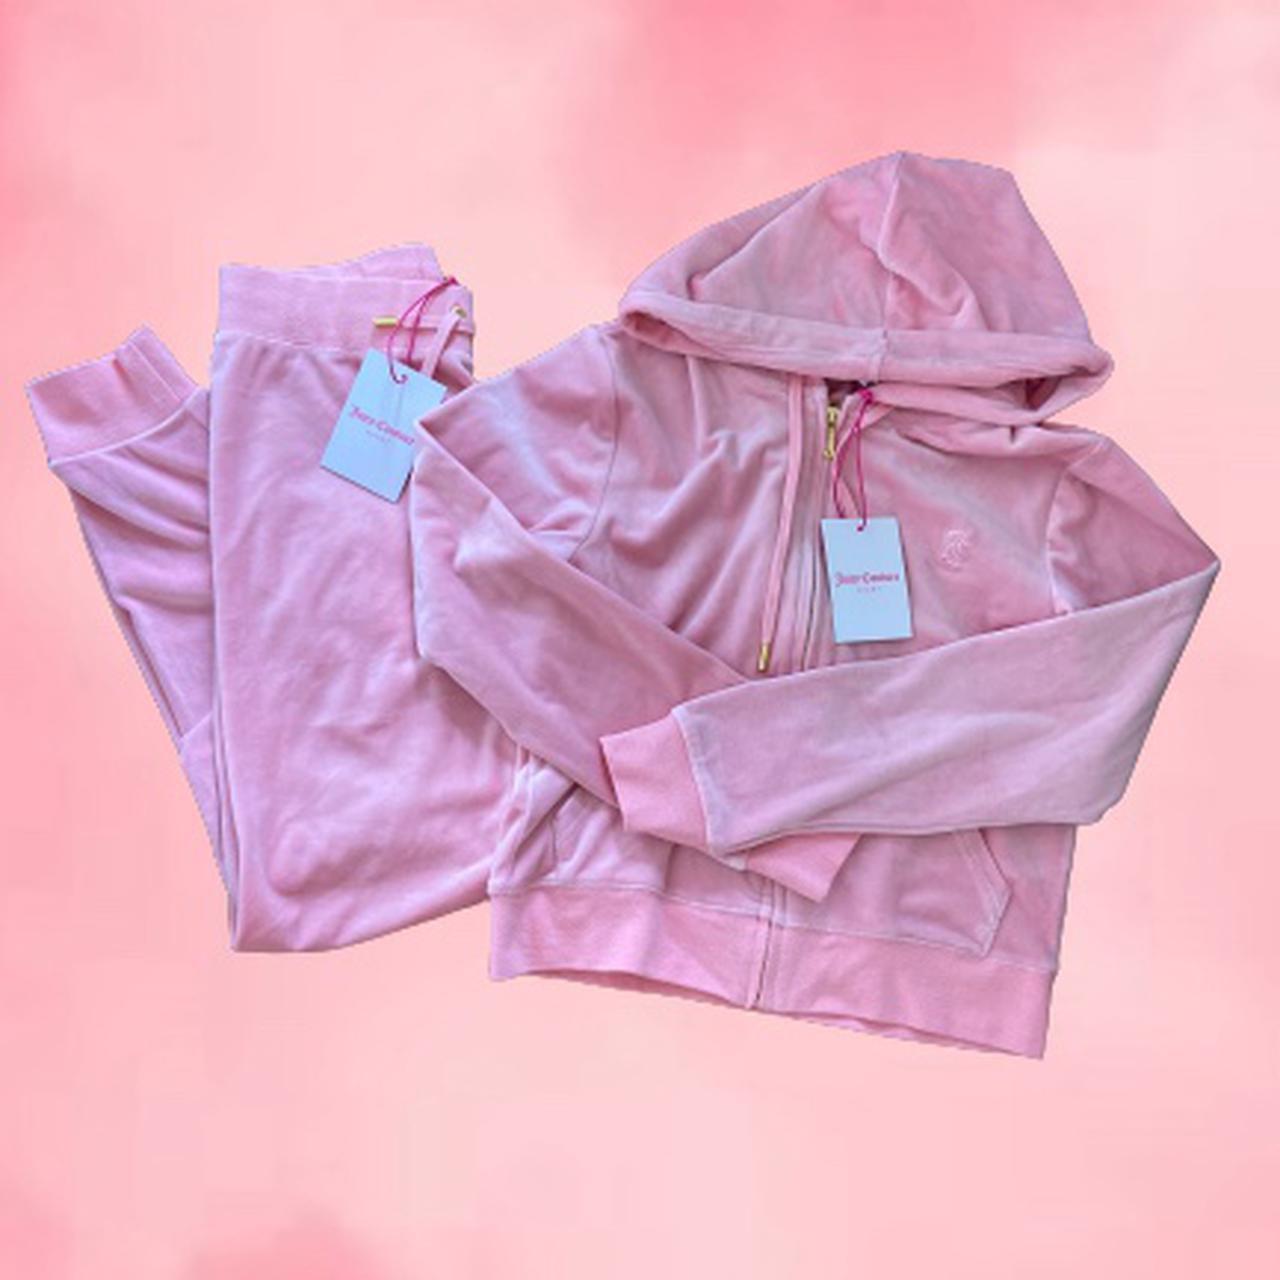 Juicy Couture Sportswear Collection